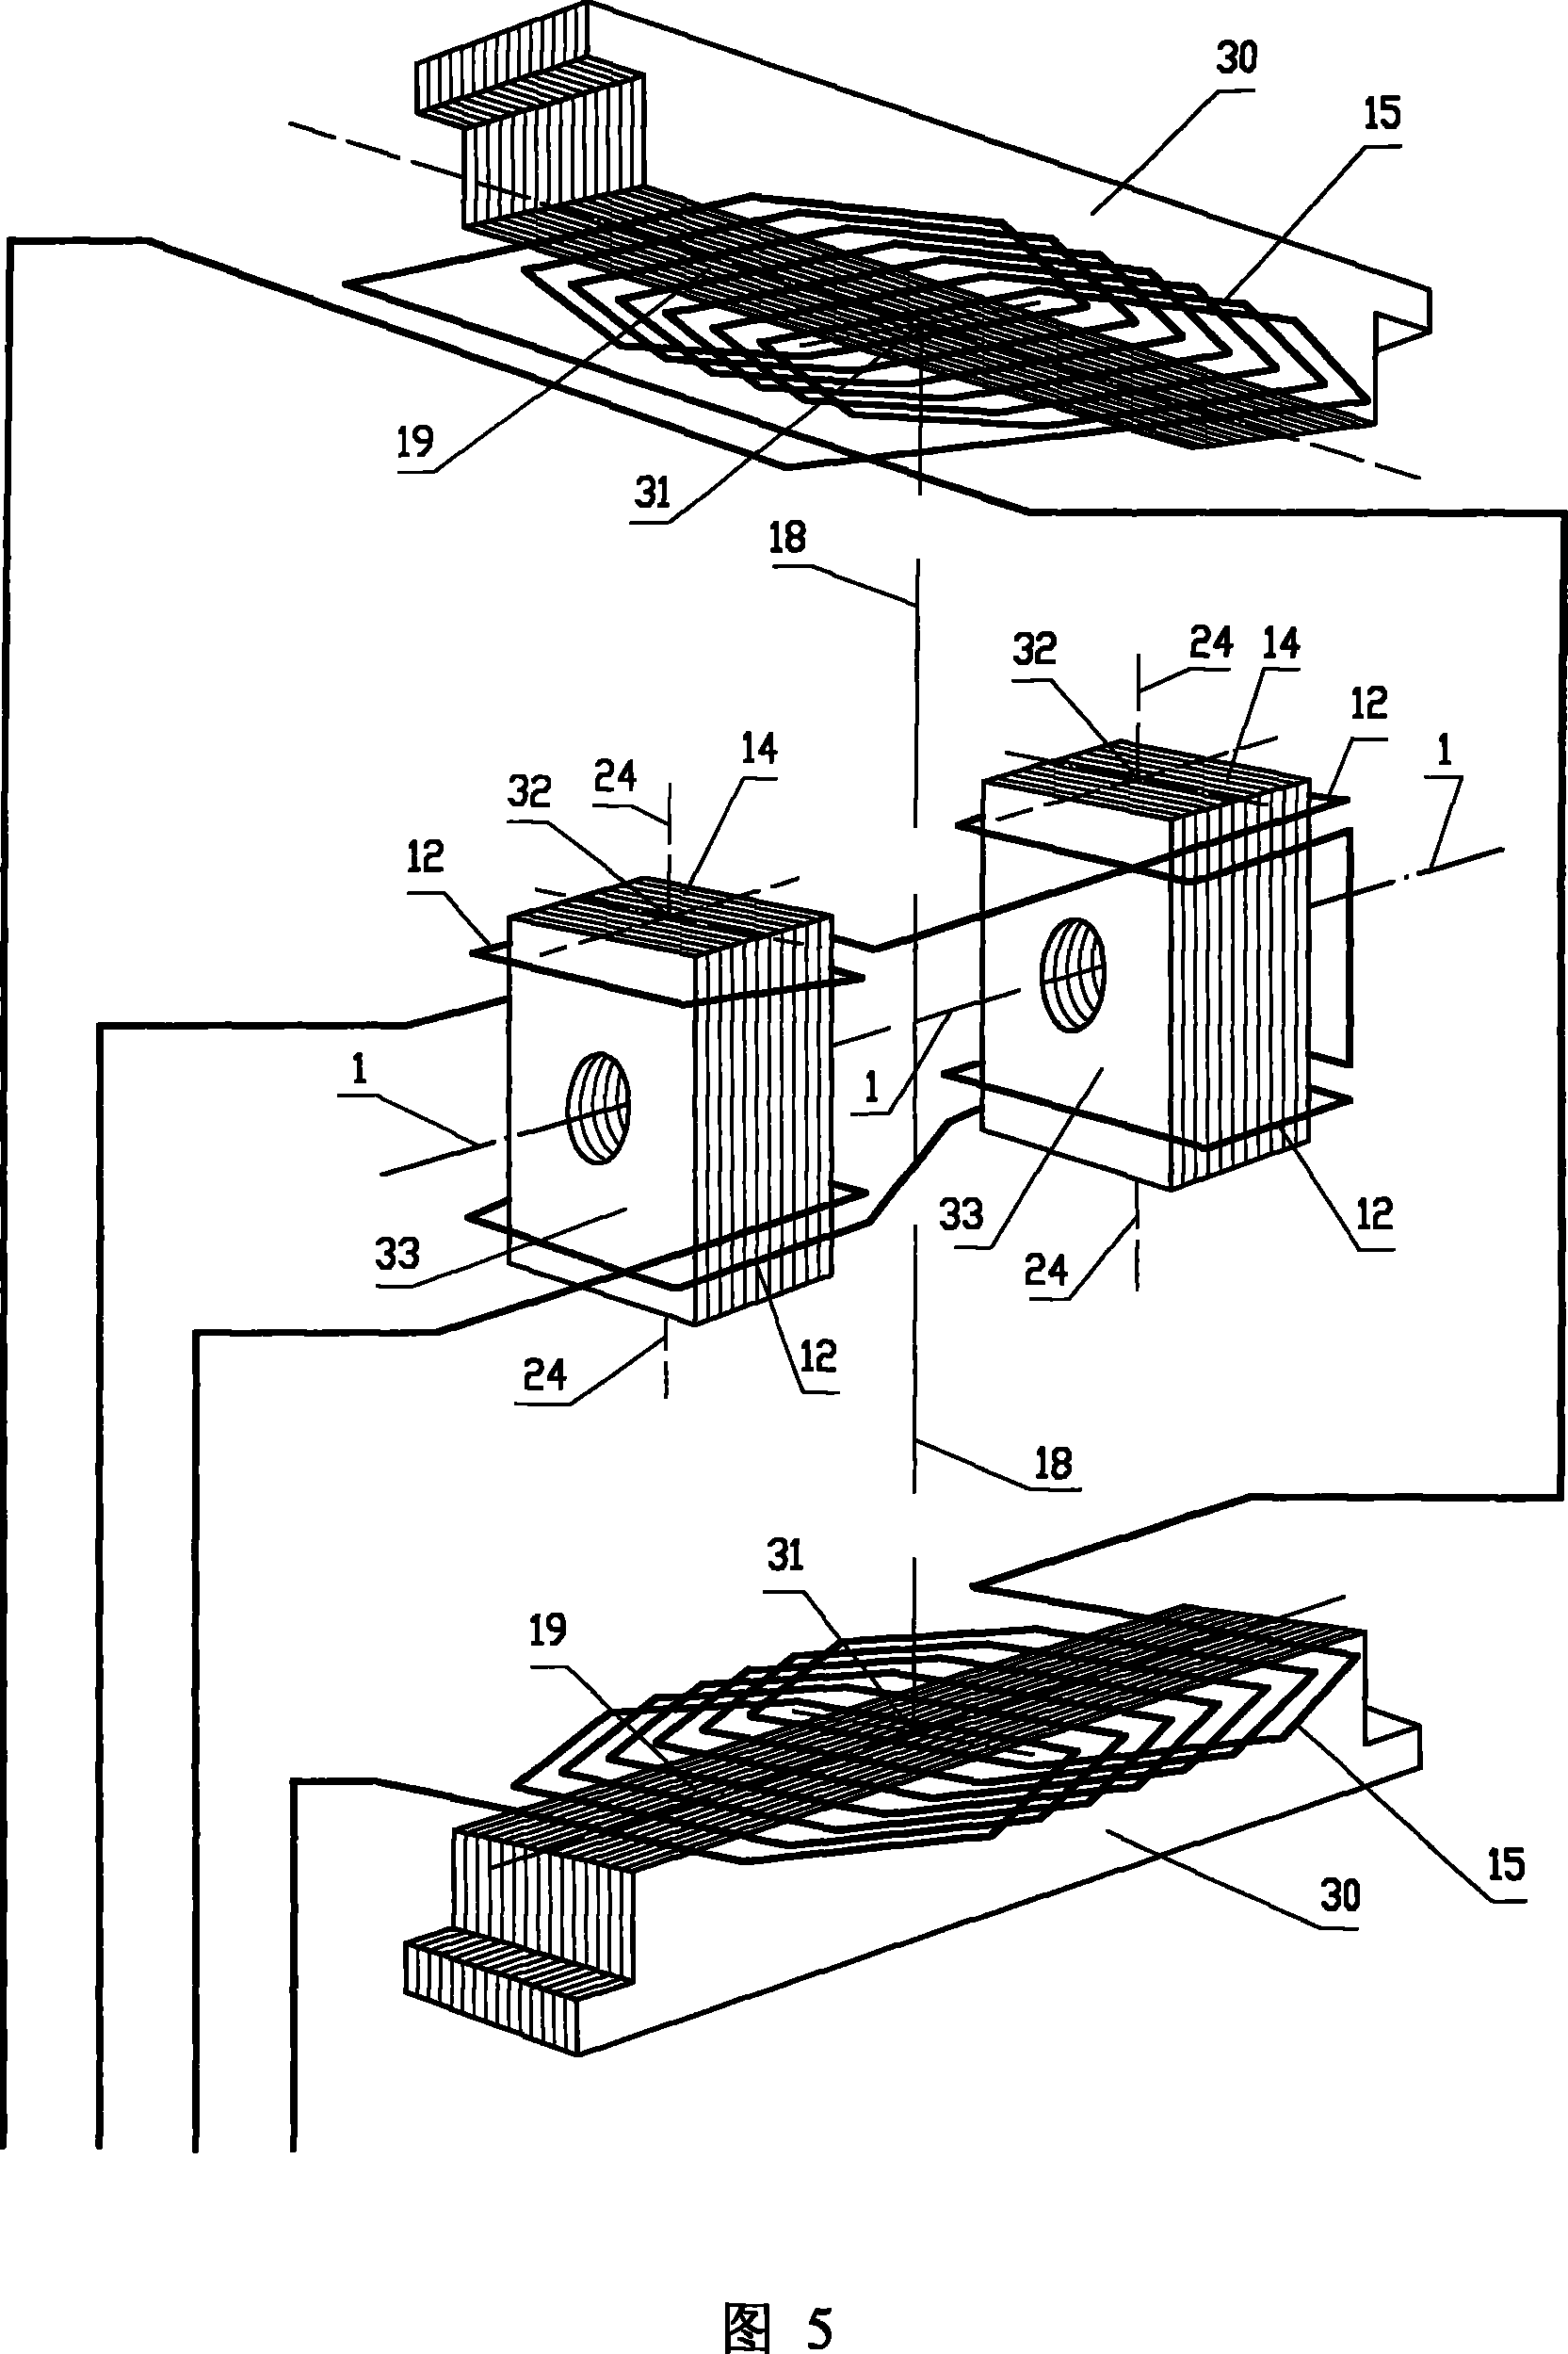 An electric harmonic reciprocating line motion impact device